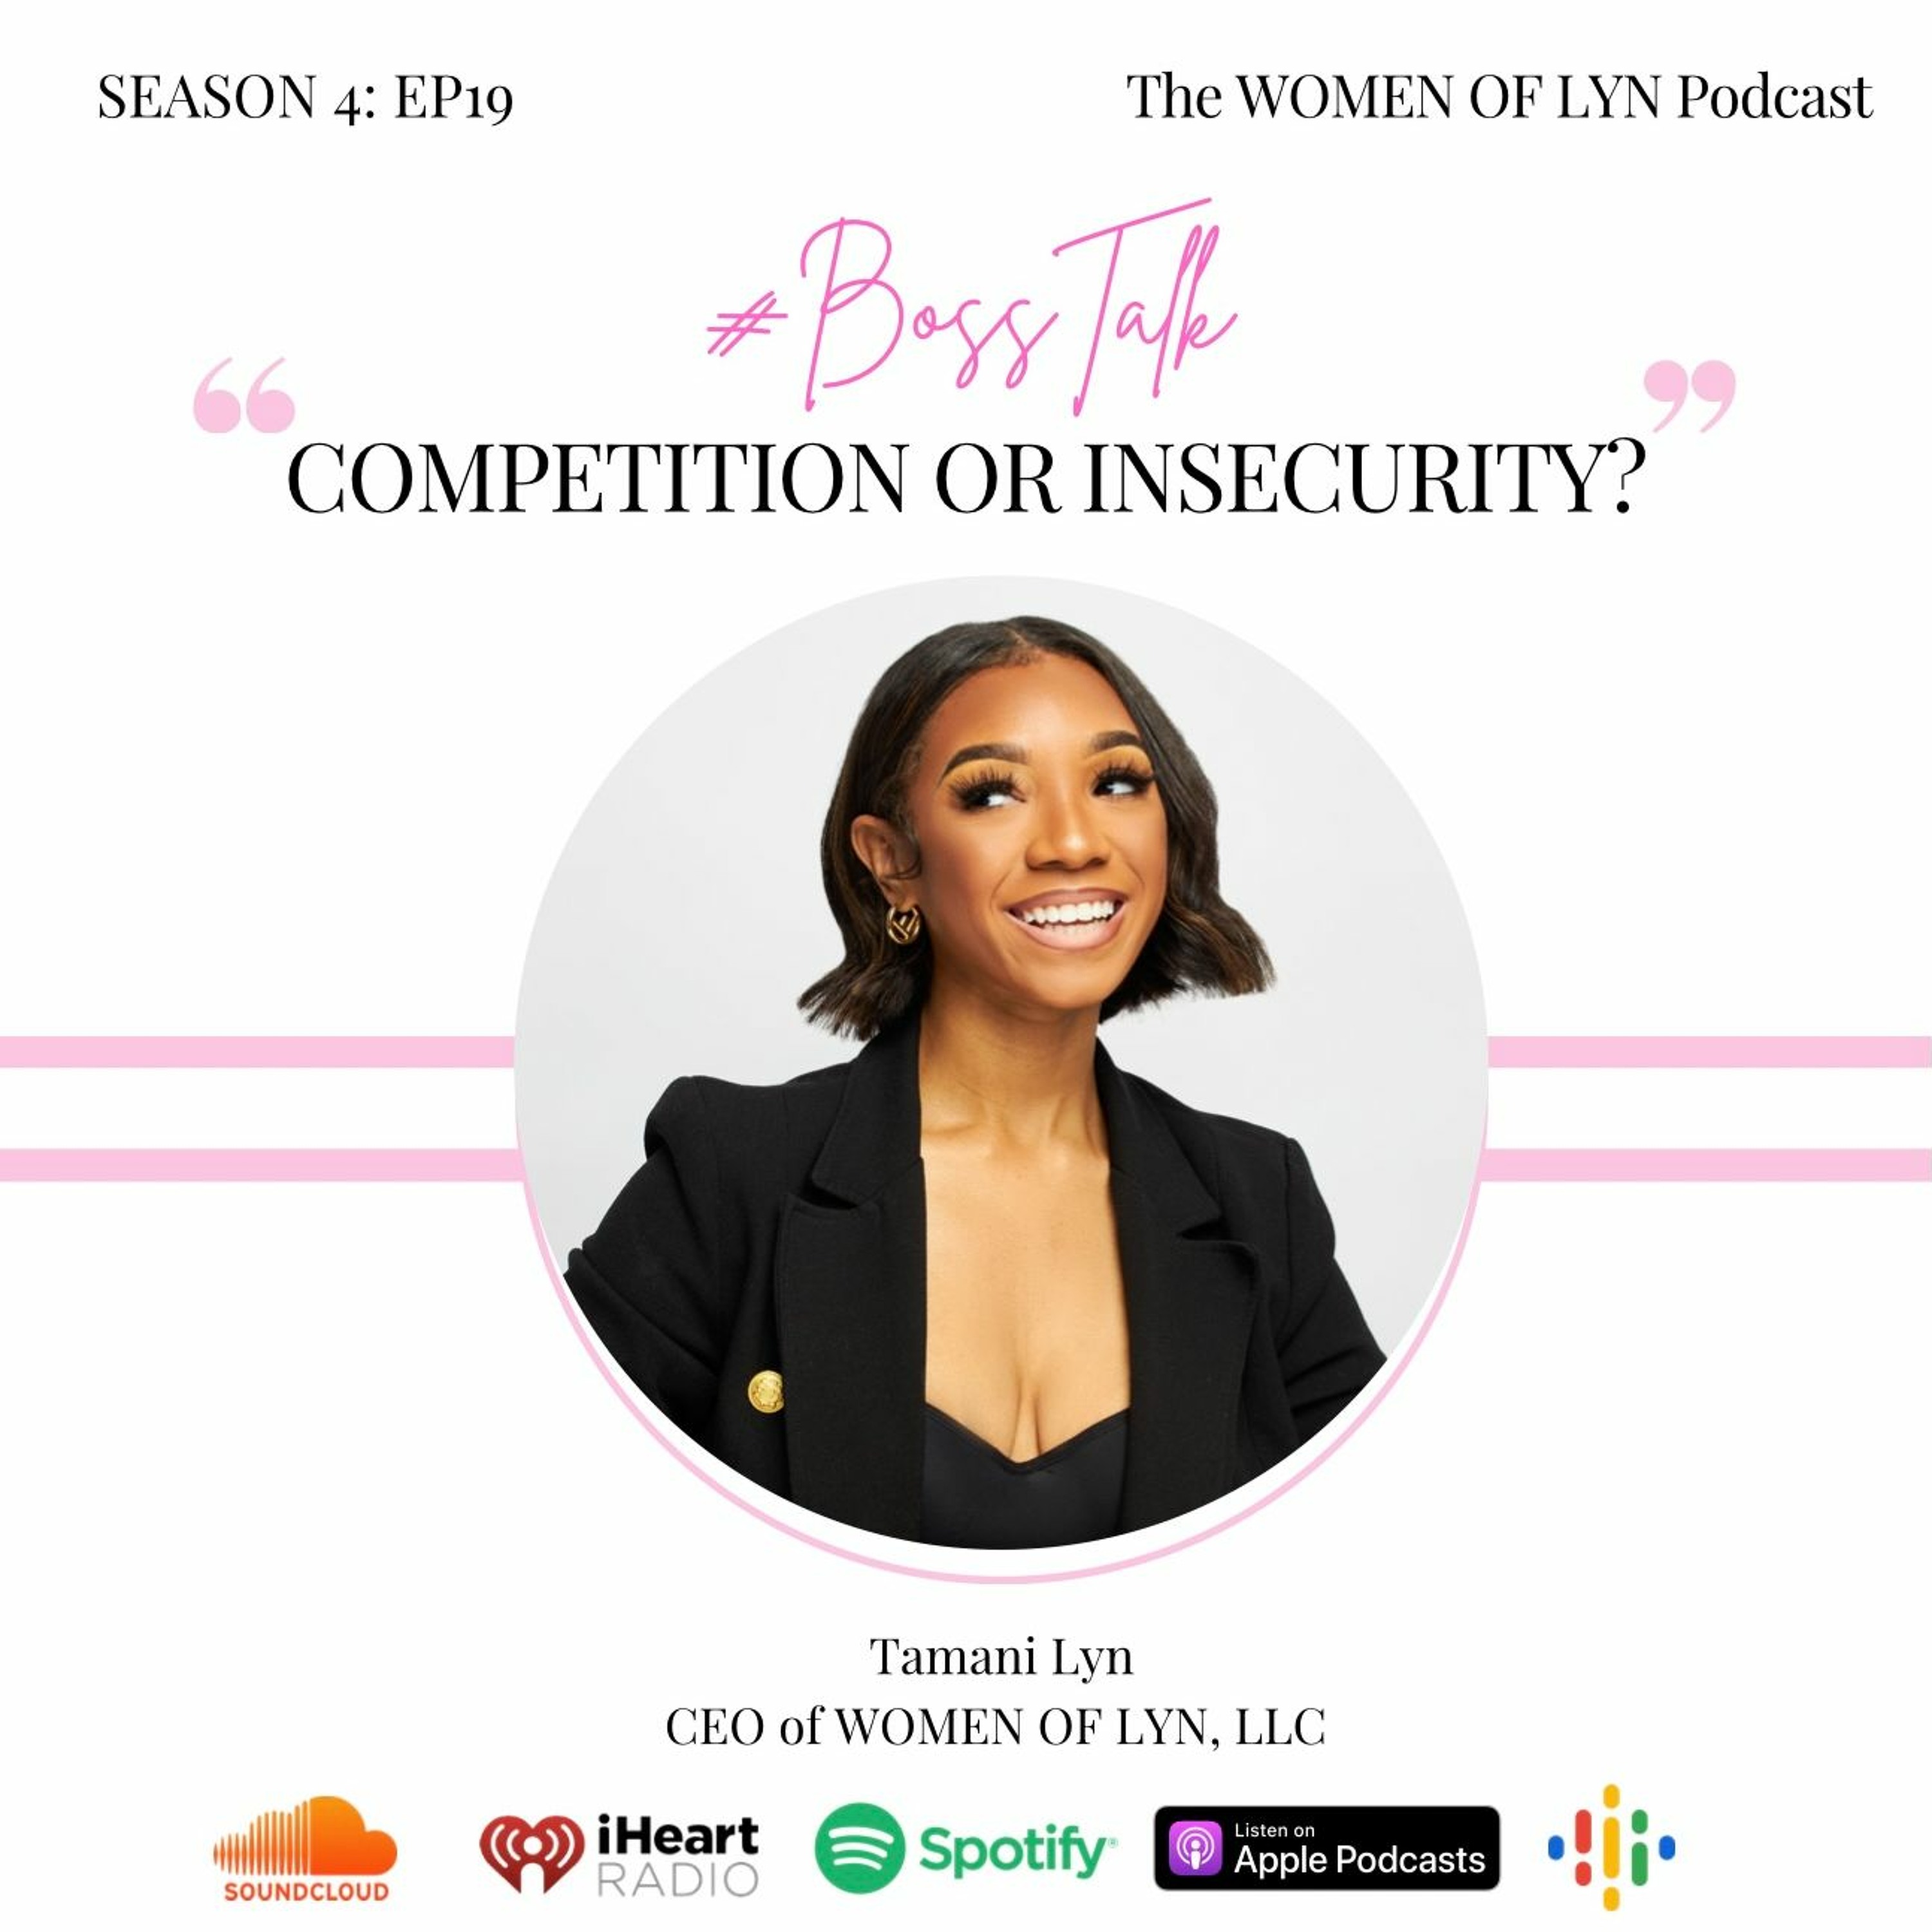 Episode 19: ”Competition or Insecurity?”